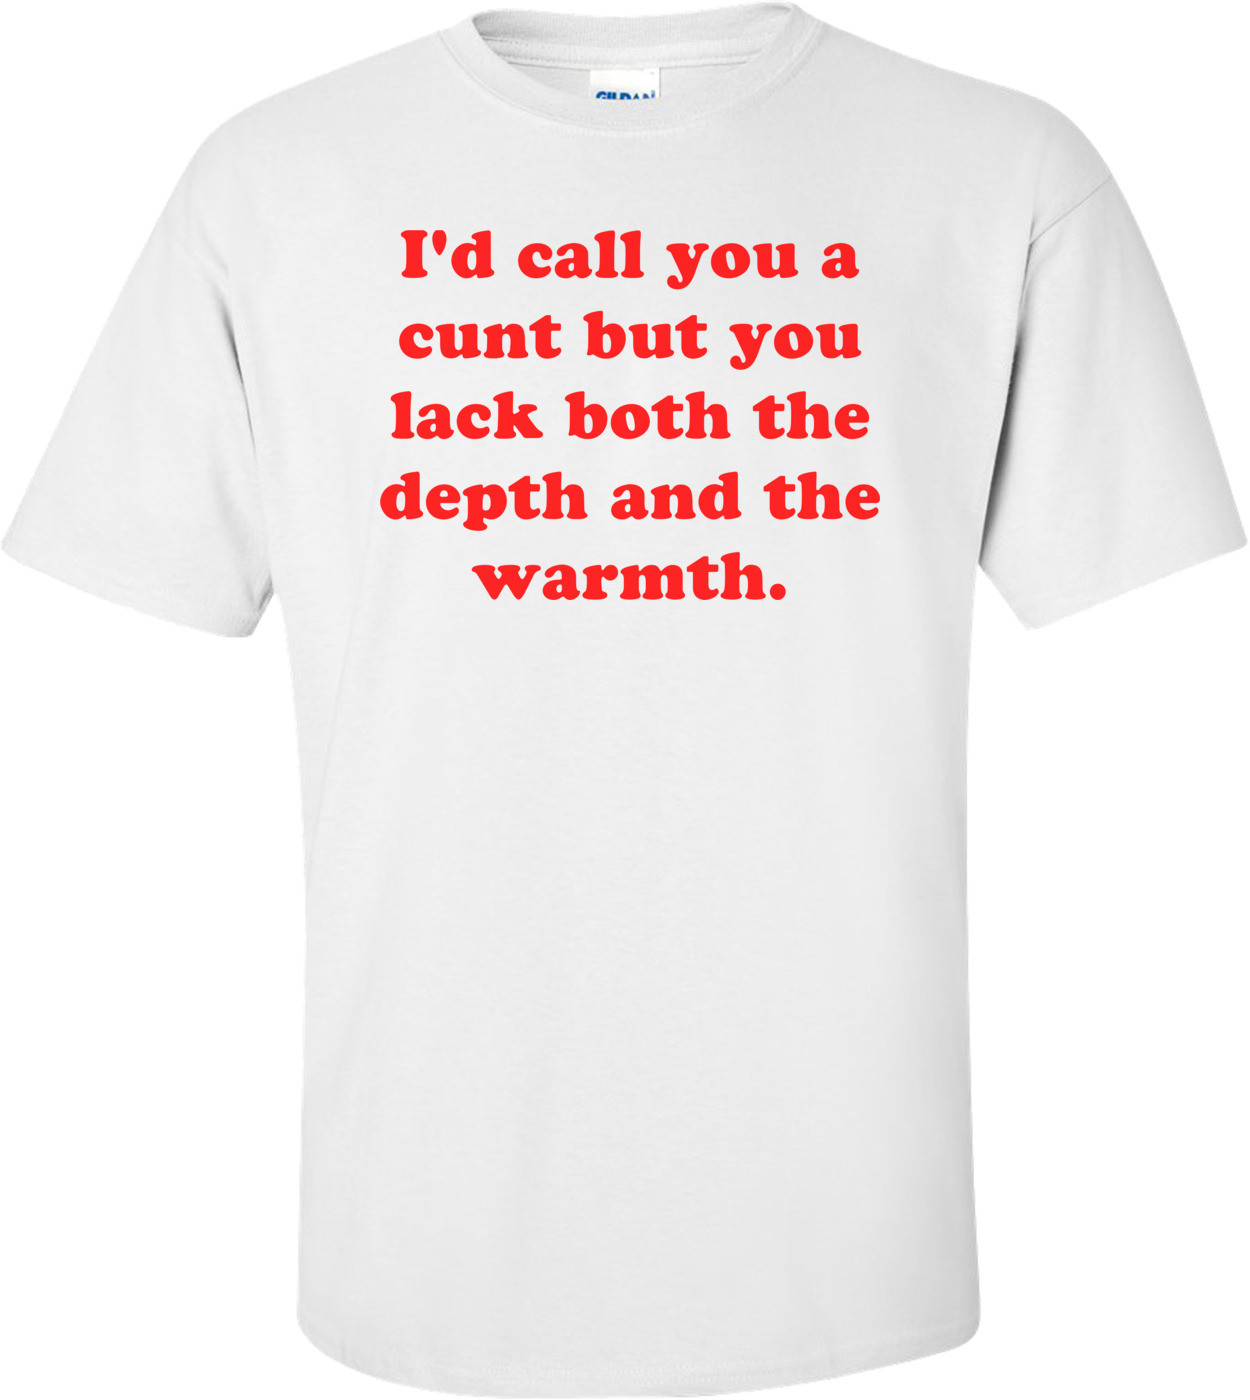 I'd call you a cunt but you lack both the depth and the warmth. Shirt